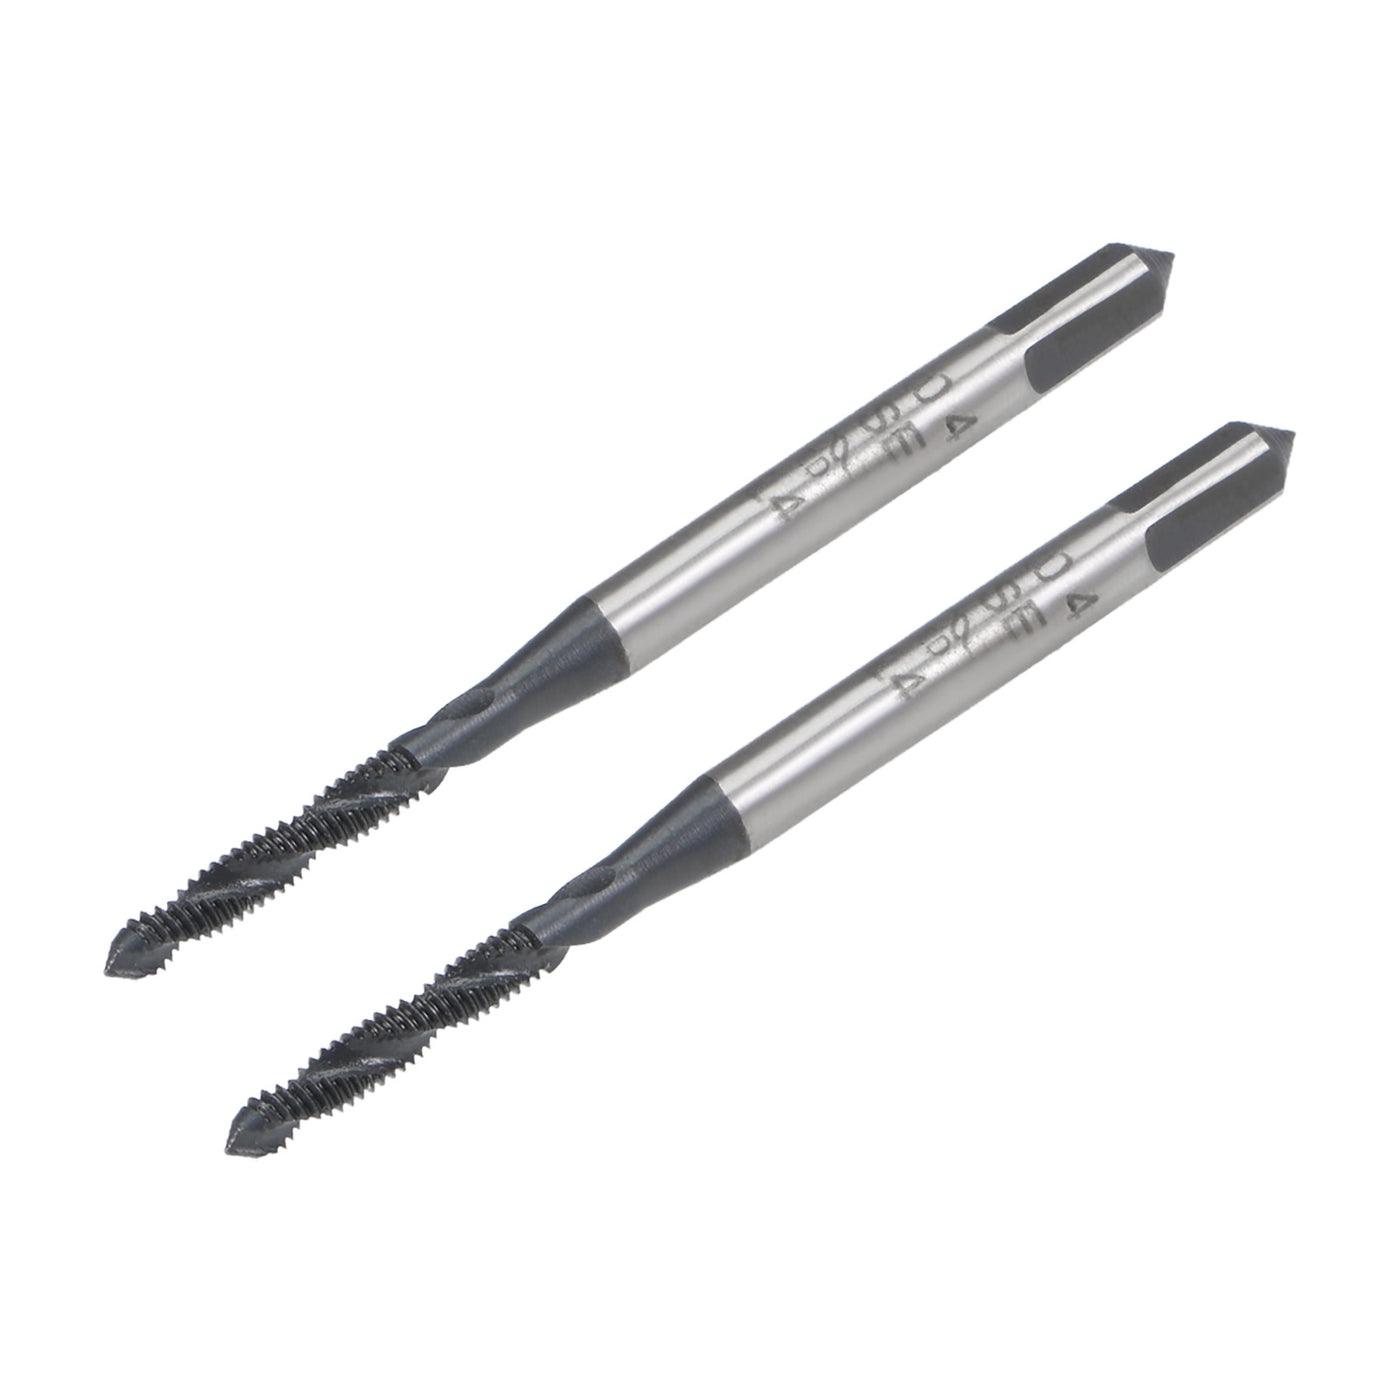 uxcell Uxcell M2 x 0.4 Spiral Flute Tap Metric Machine Thread Tap HSS Nitriding Coated 2pcs